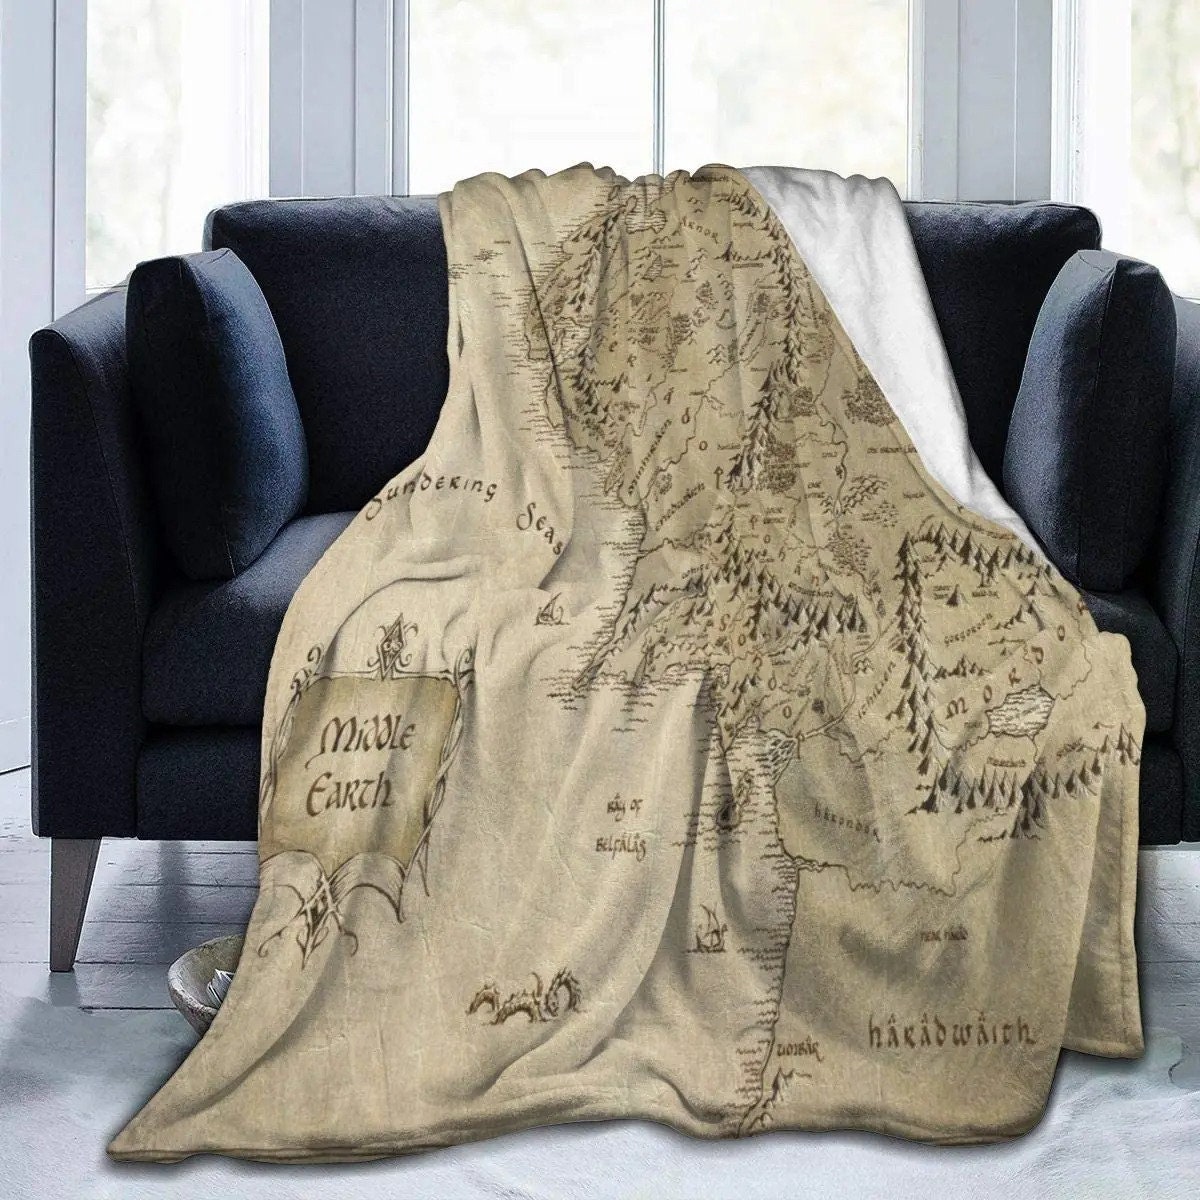 The Lord of the Rings Blanket, Middle-earth Sofa Cover, Napping Fleece,  Bedding Birthday Gift, Home Decor, Christmas Present 